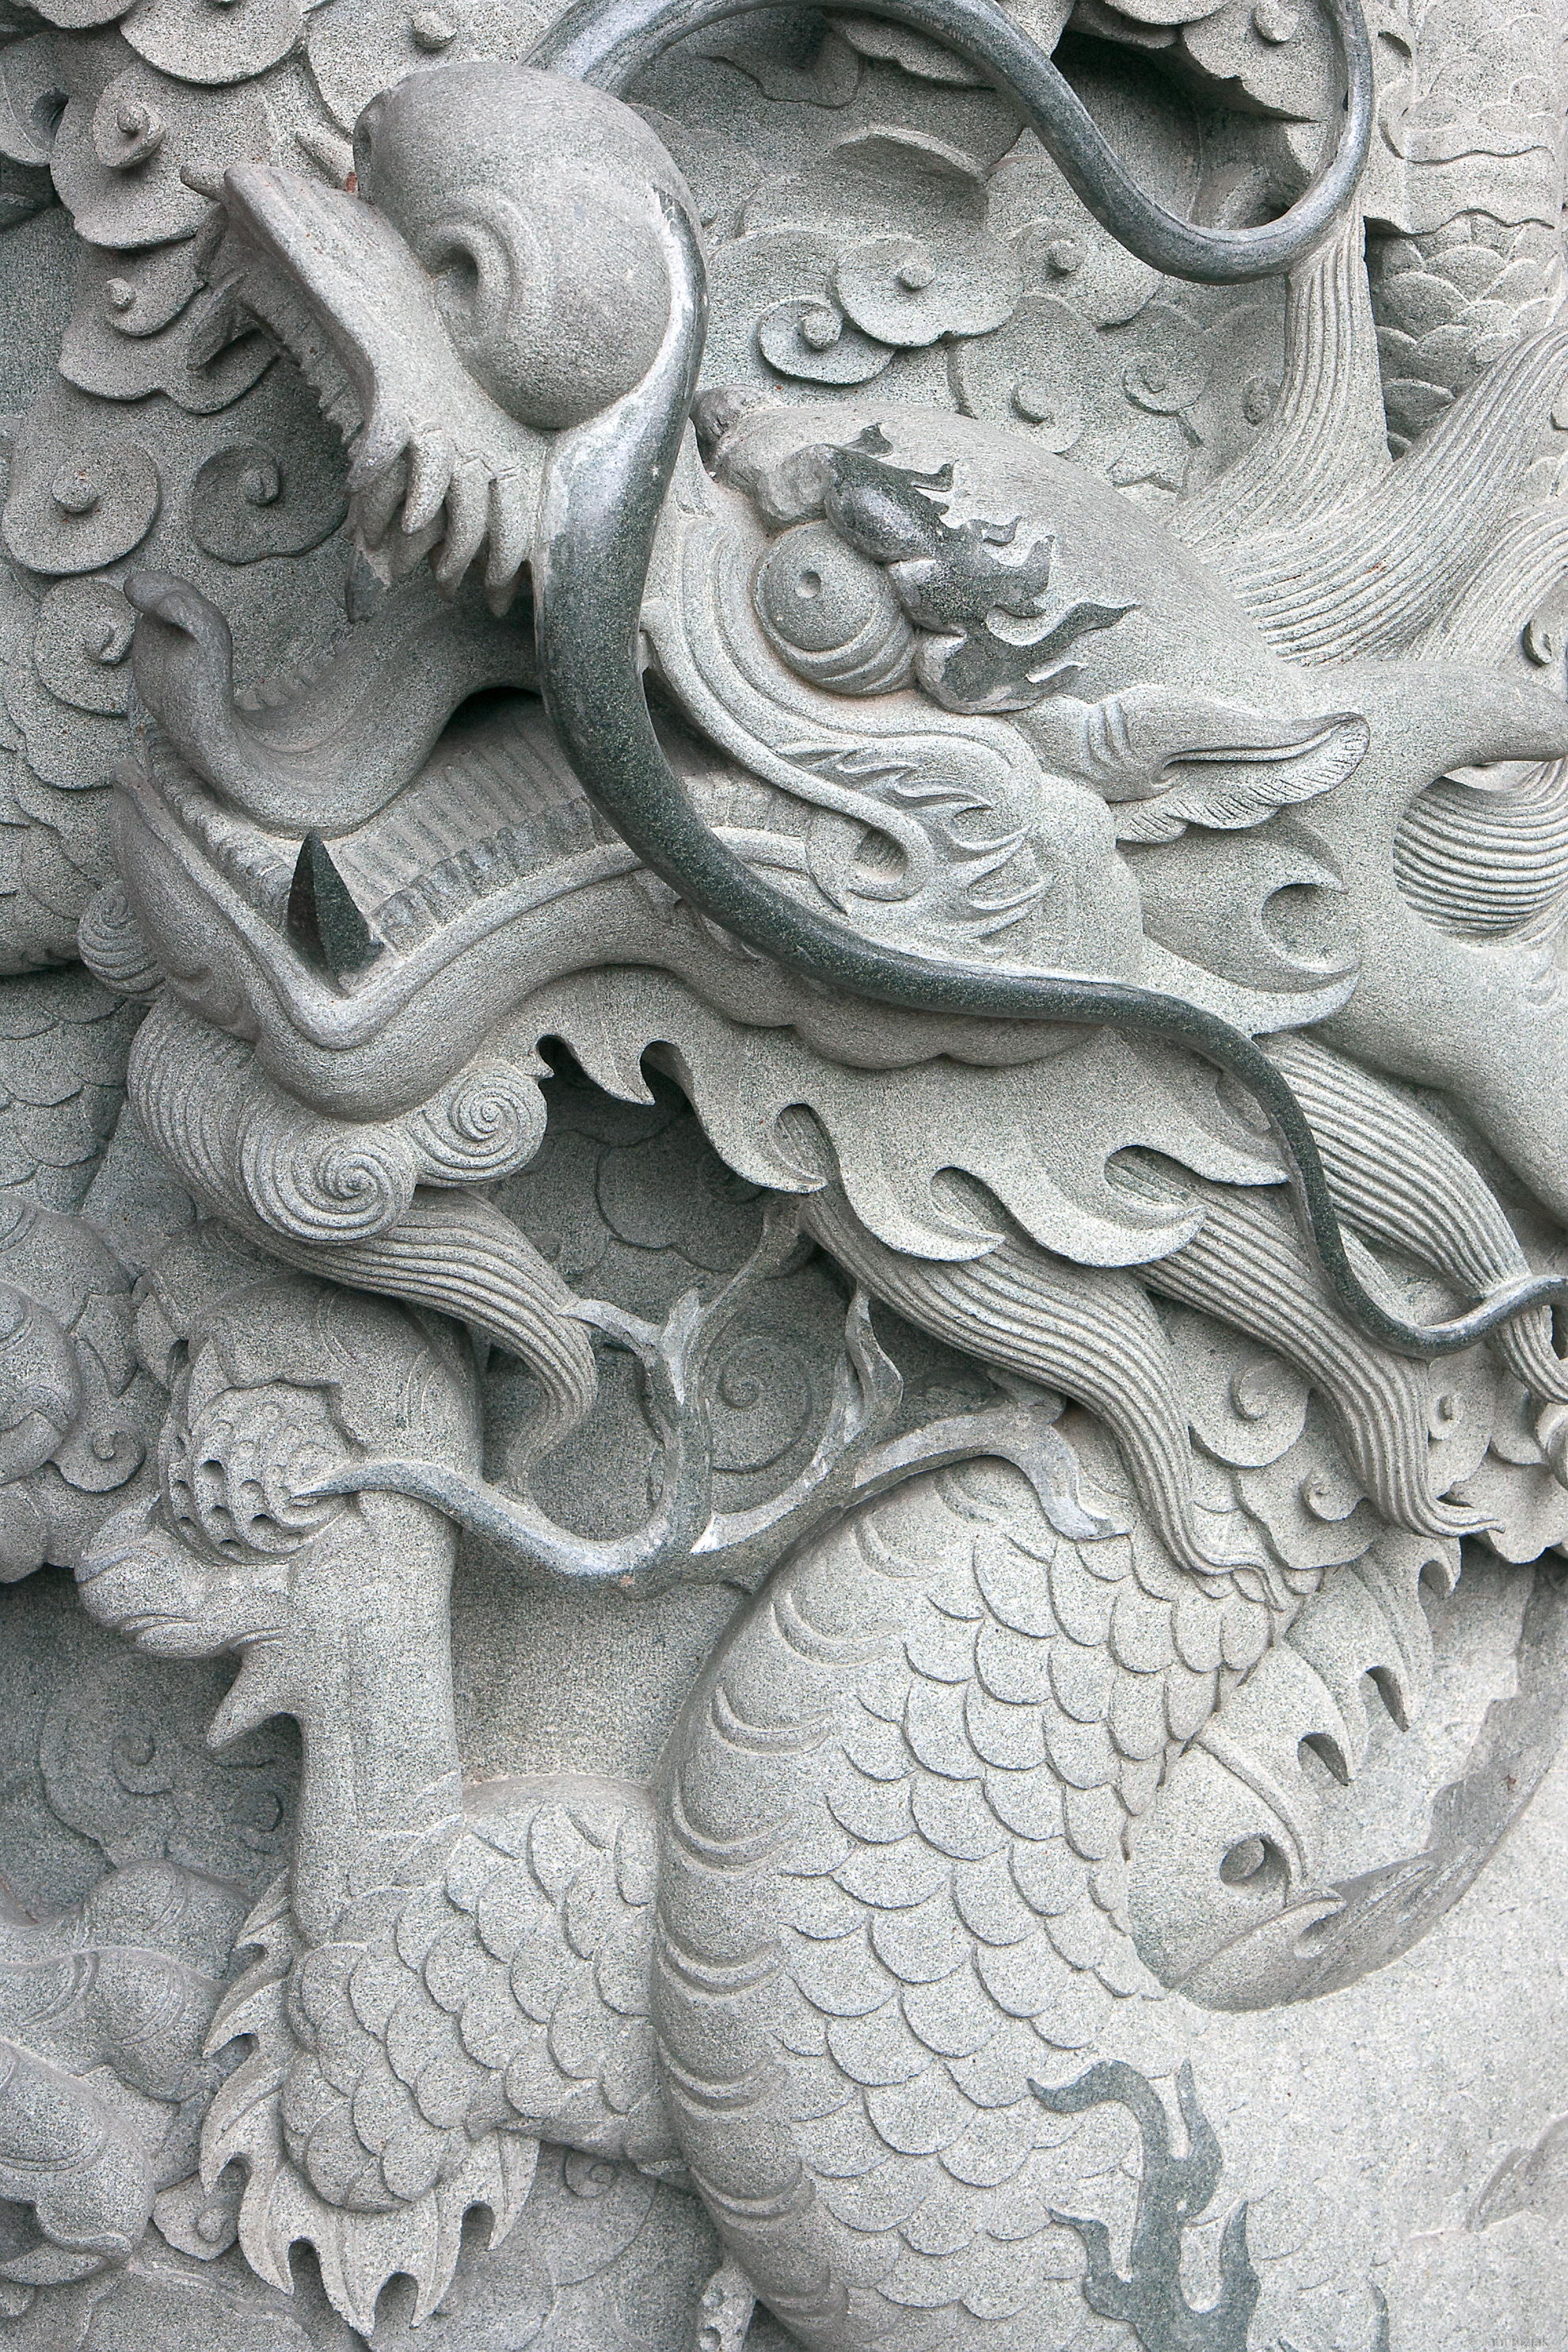 Dragon in the monastery building.